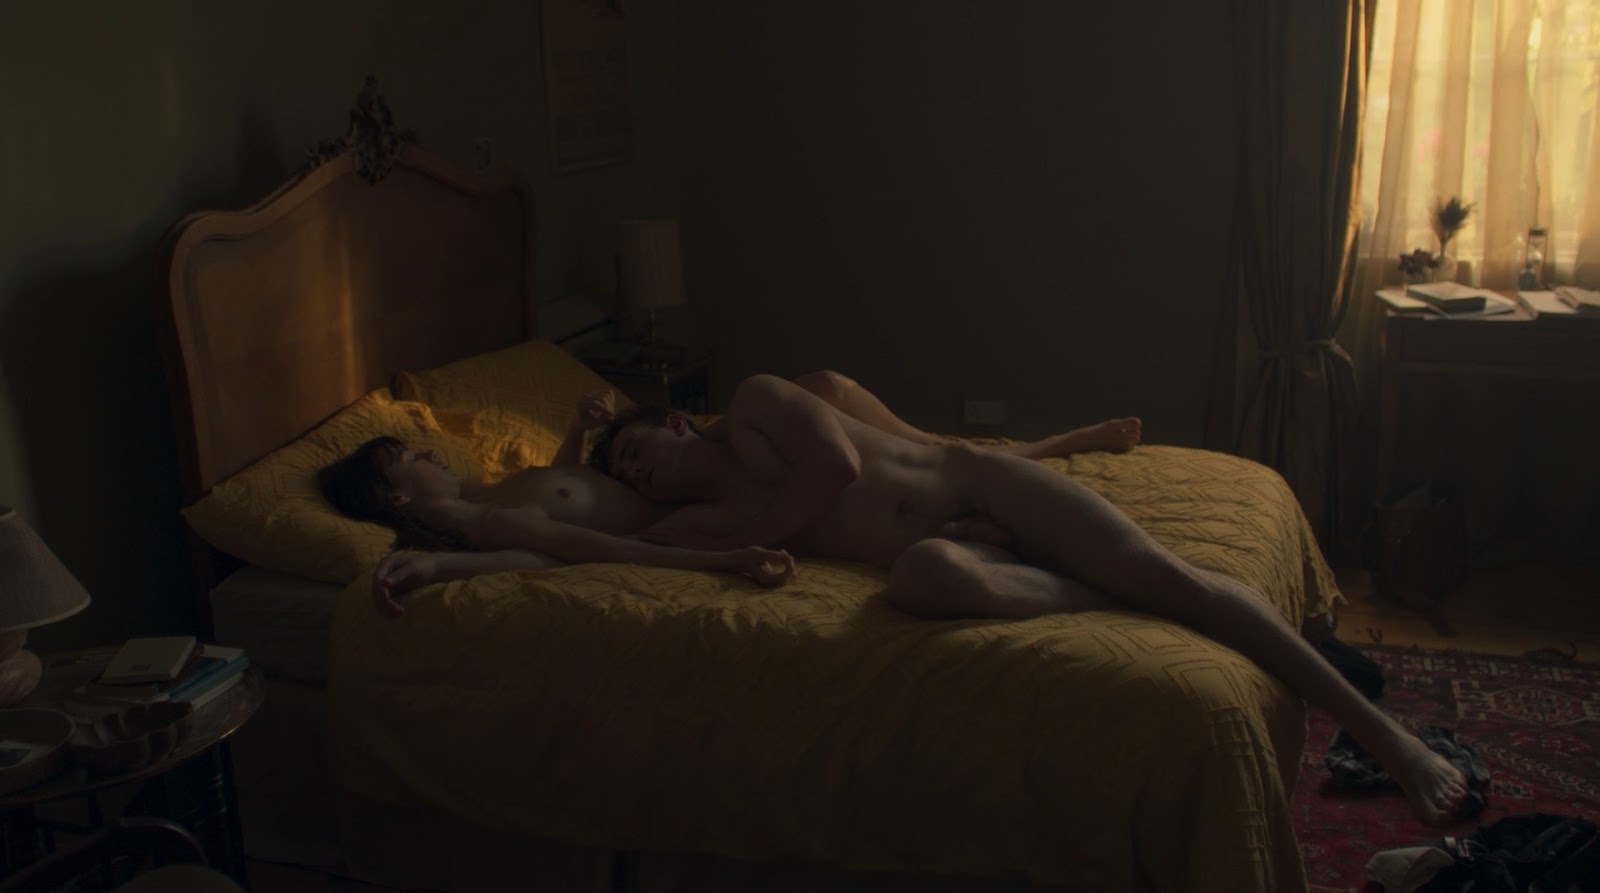 Paul mescal naked - 🧡 Top movie / TV nudes from the first half of 2020 Ban...